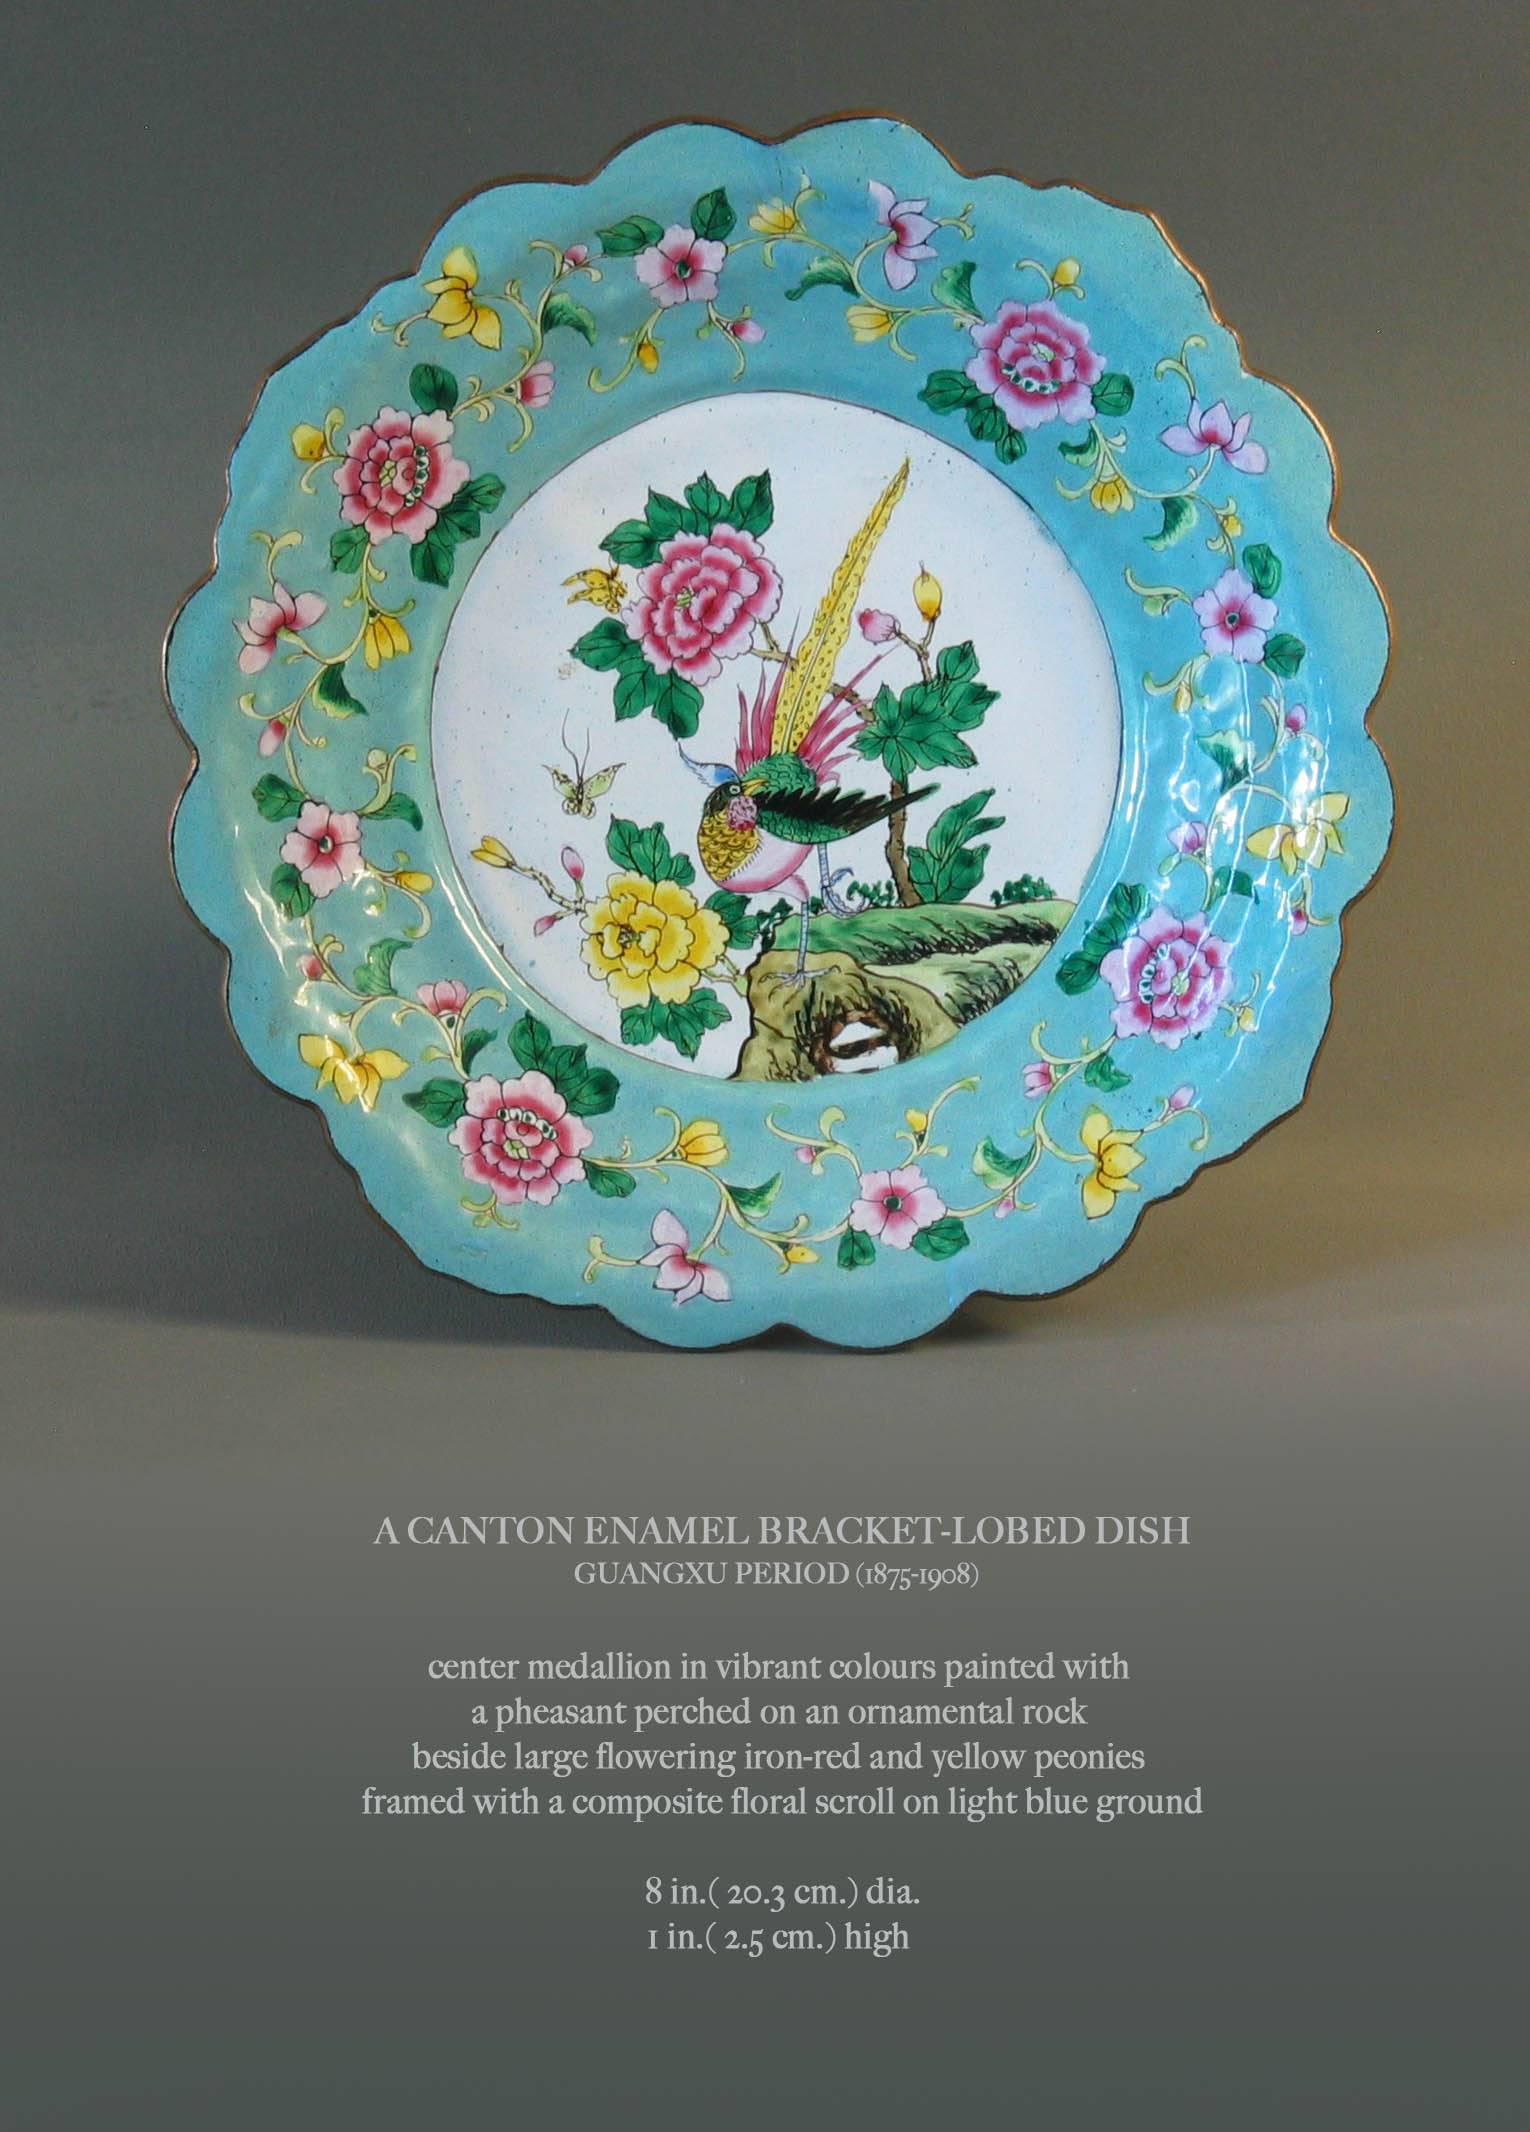 A canton enamel bracket-lobed dish, Guangxu period (1875-1908), with a centre medallion in vibrant colors painted with a pheasant perched on an ornamental rock beside large flowering iron-red and yellow peonies framed with a composite floral scroll